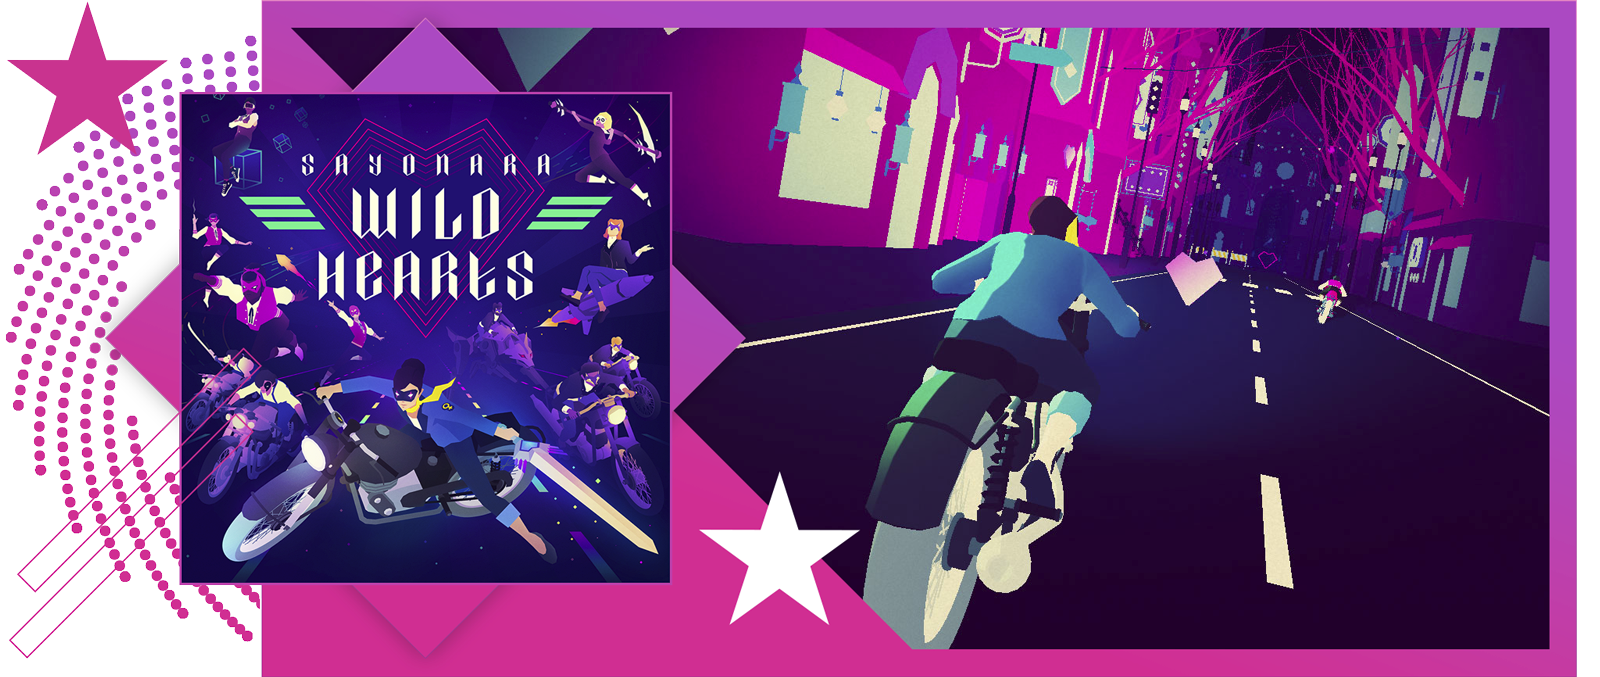 Best rhythm games feature image, featuring key art and gameplay from Sayonara Wild Hearts.